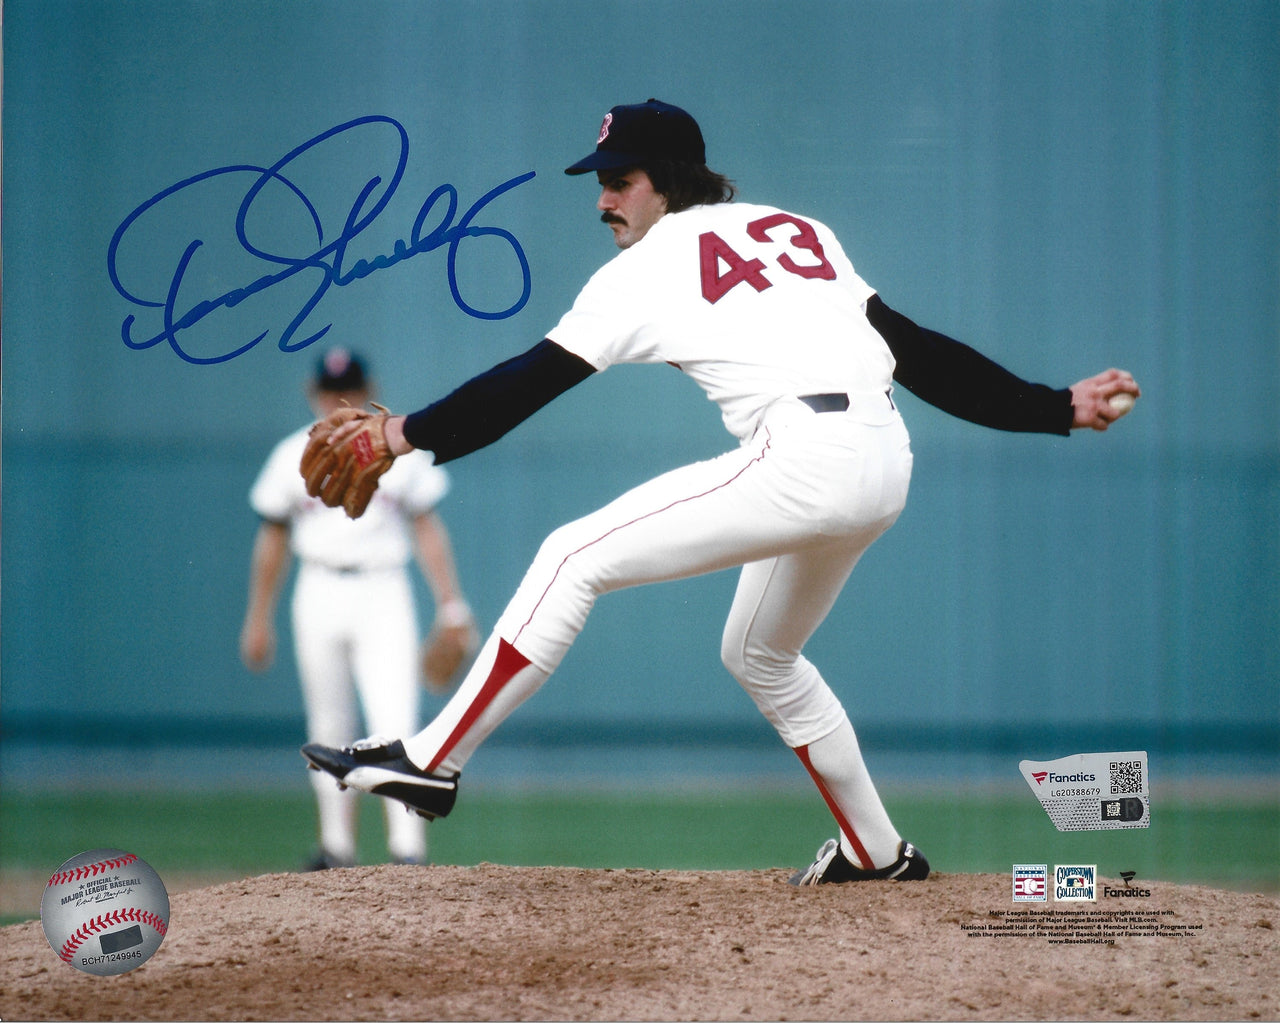 Dennis Eckersley in Action Boston Red Sox Autographed 11" x 14" Baseball Photo - Dynasty Sports & Framing 